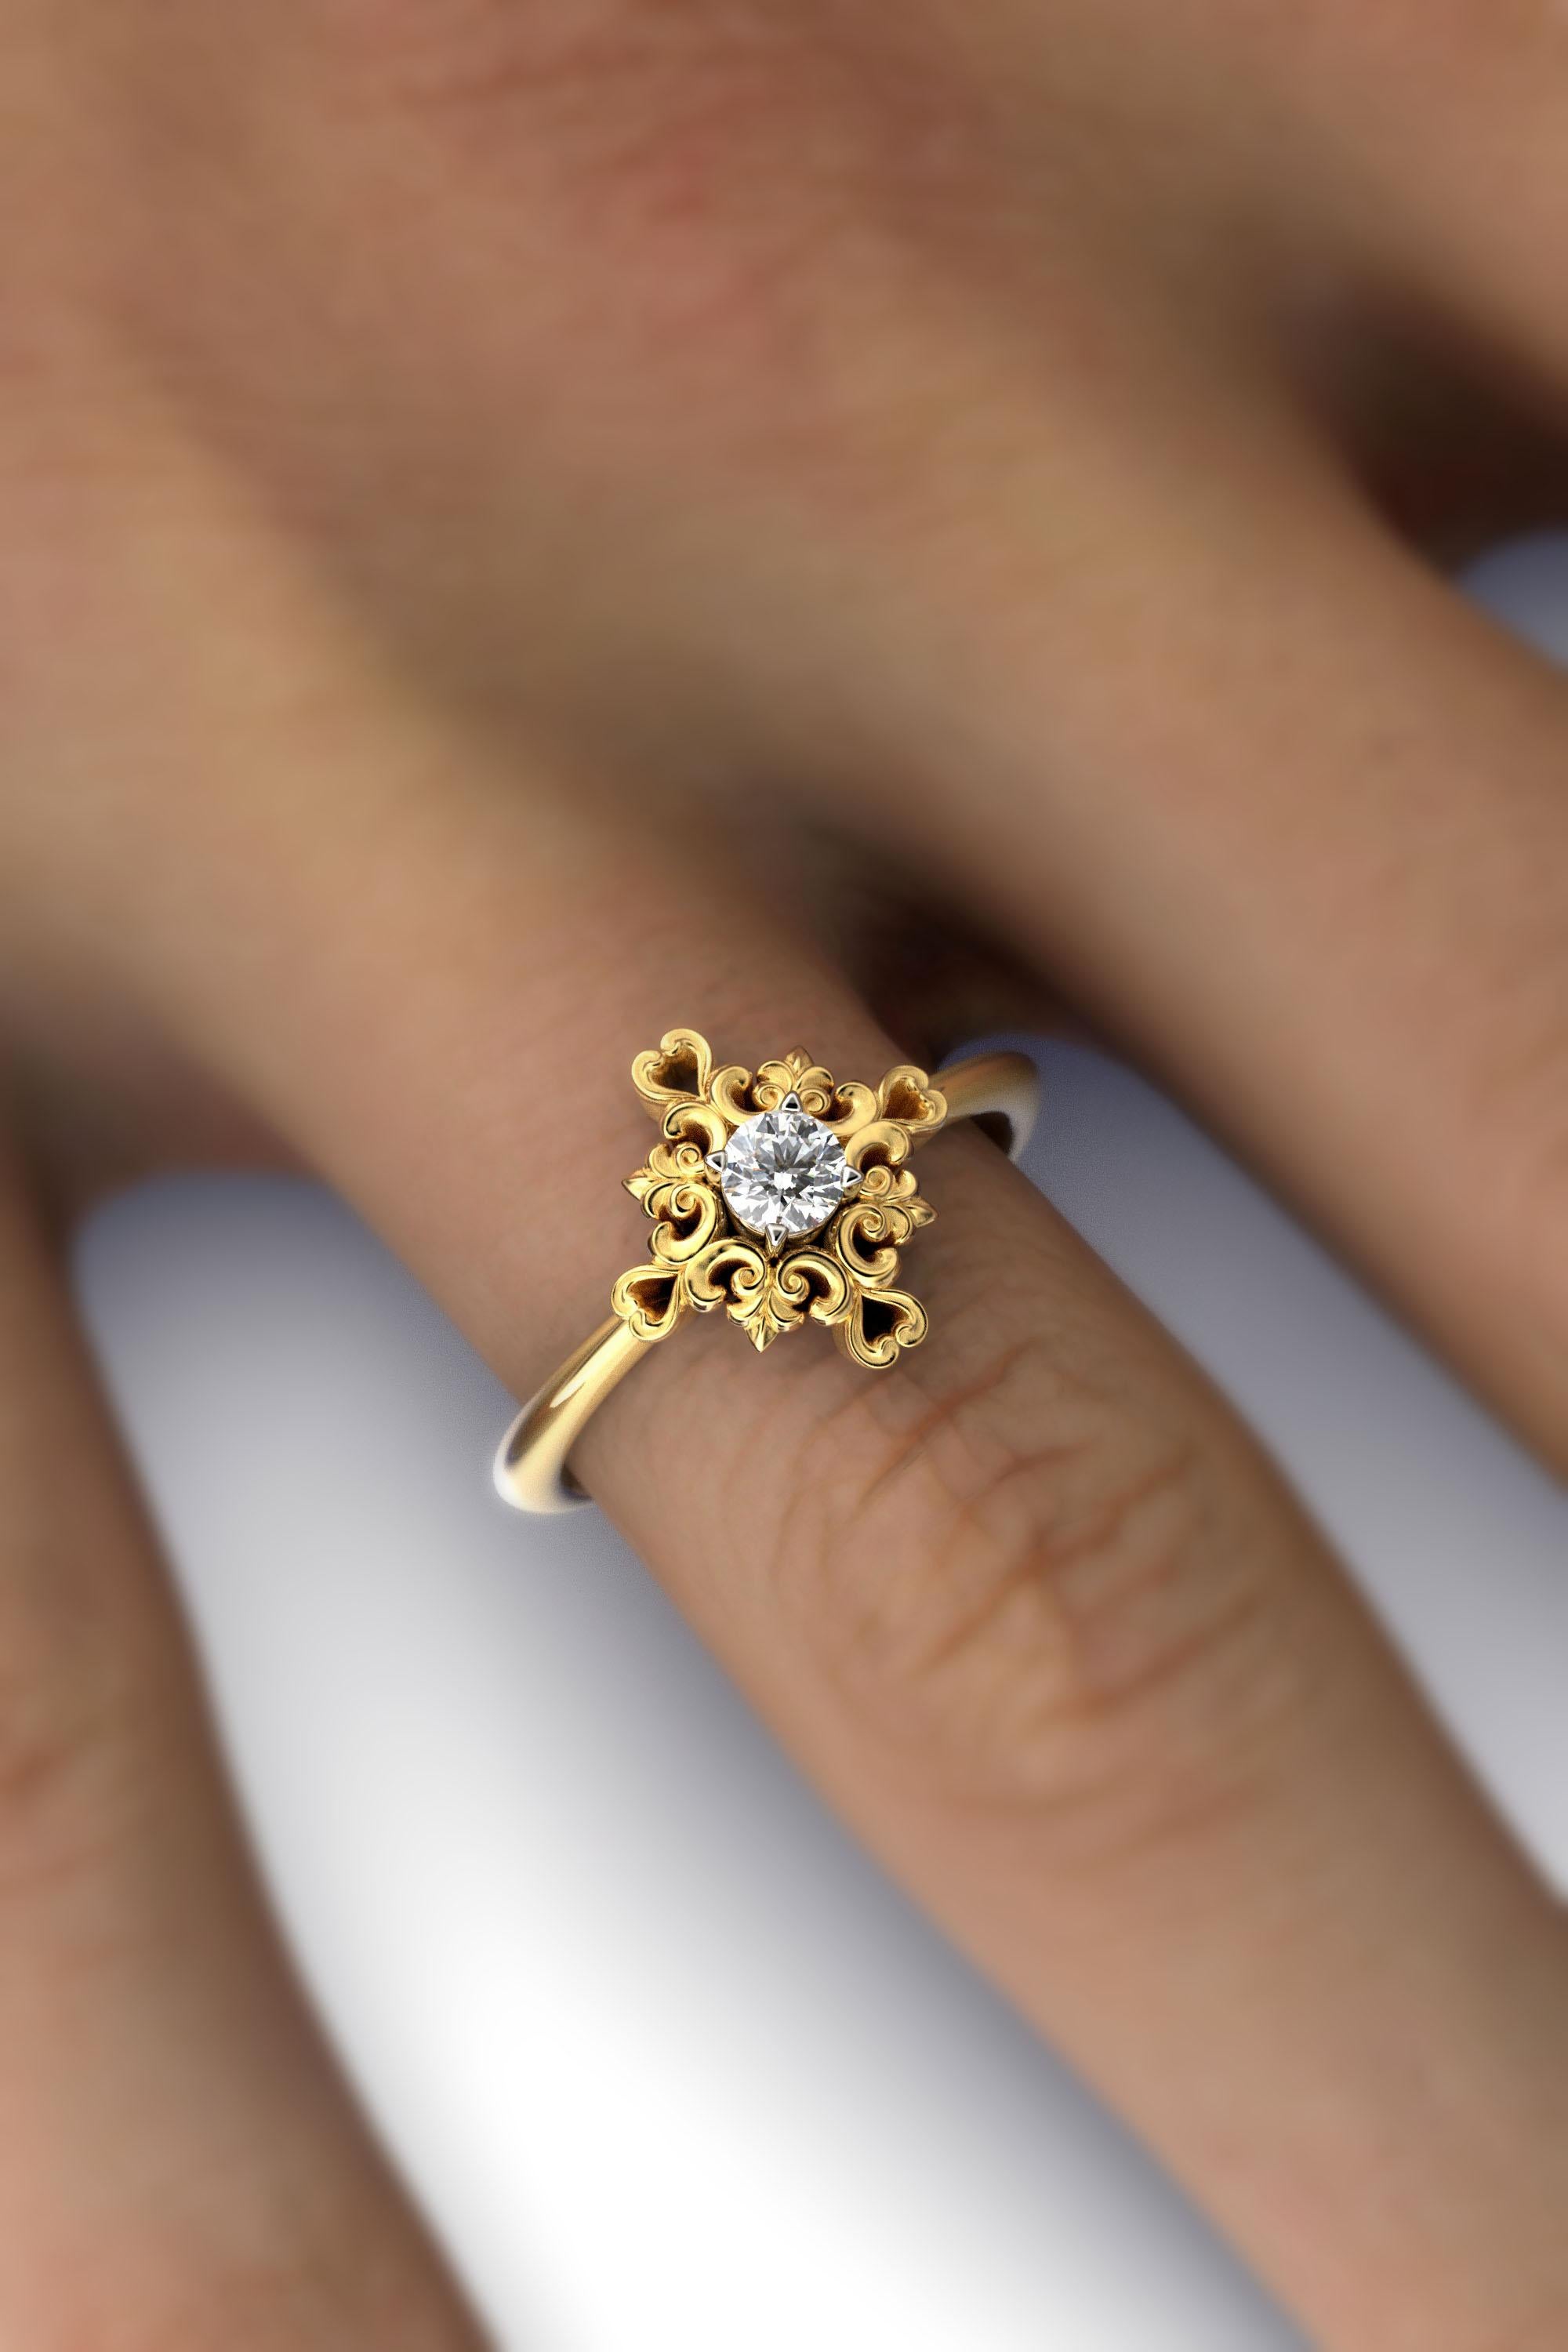 For Sale:  Italian Diamond Engagement Ring with Baroque Setting 18k gold 4